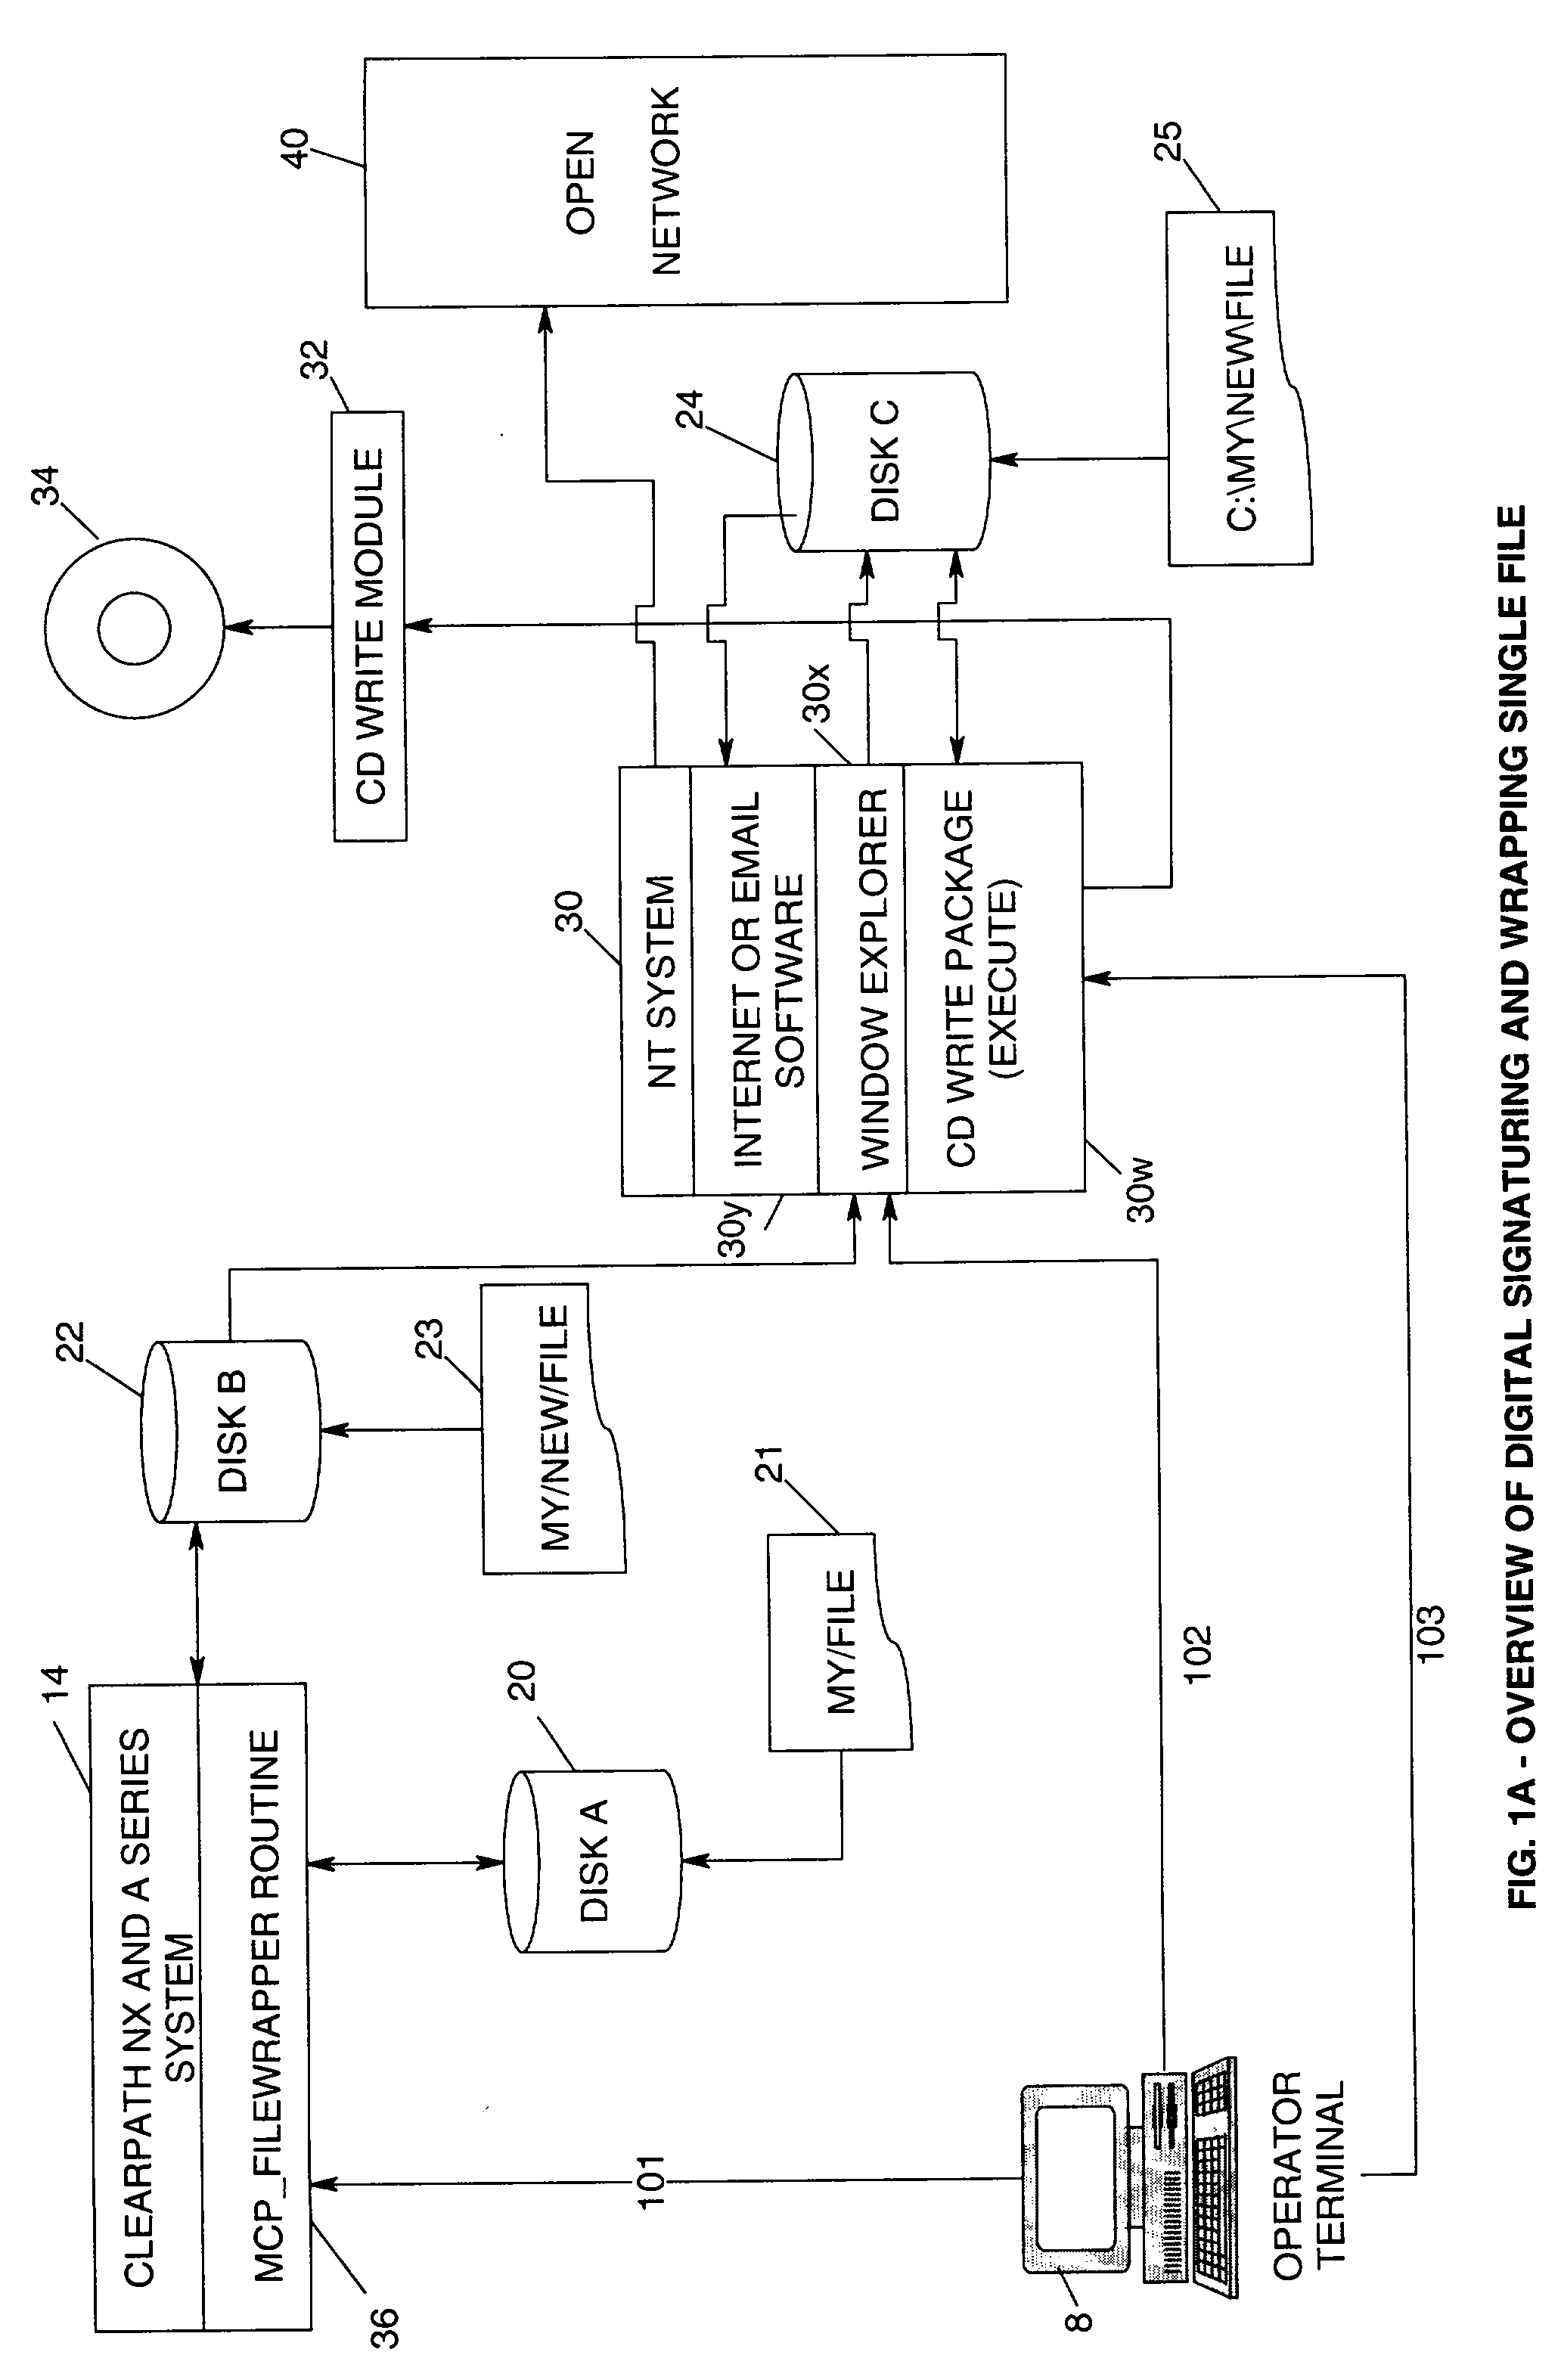 Digital signaturing method and system for packaging specialized native files for open network transport and for burning onto cd-rom